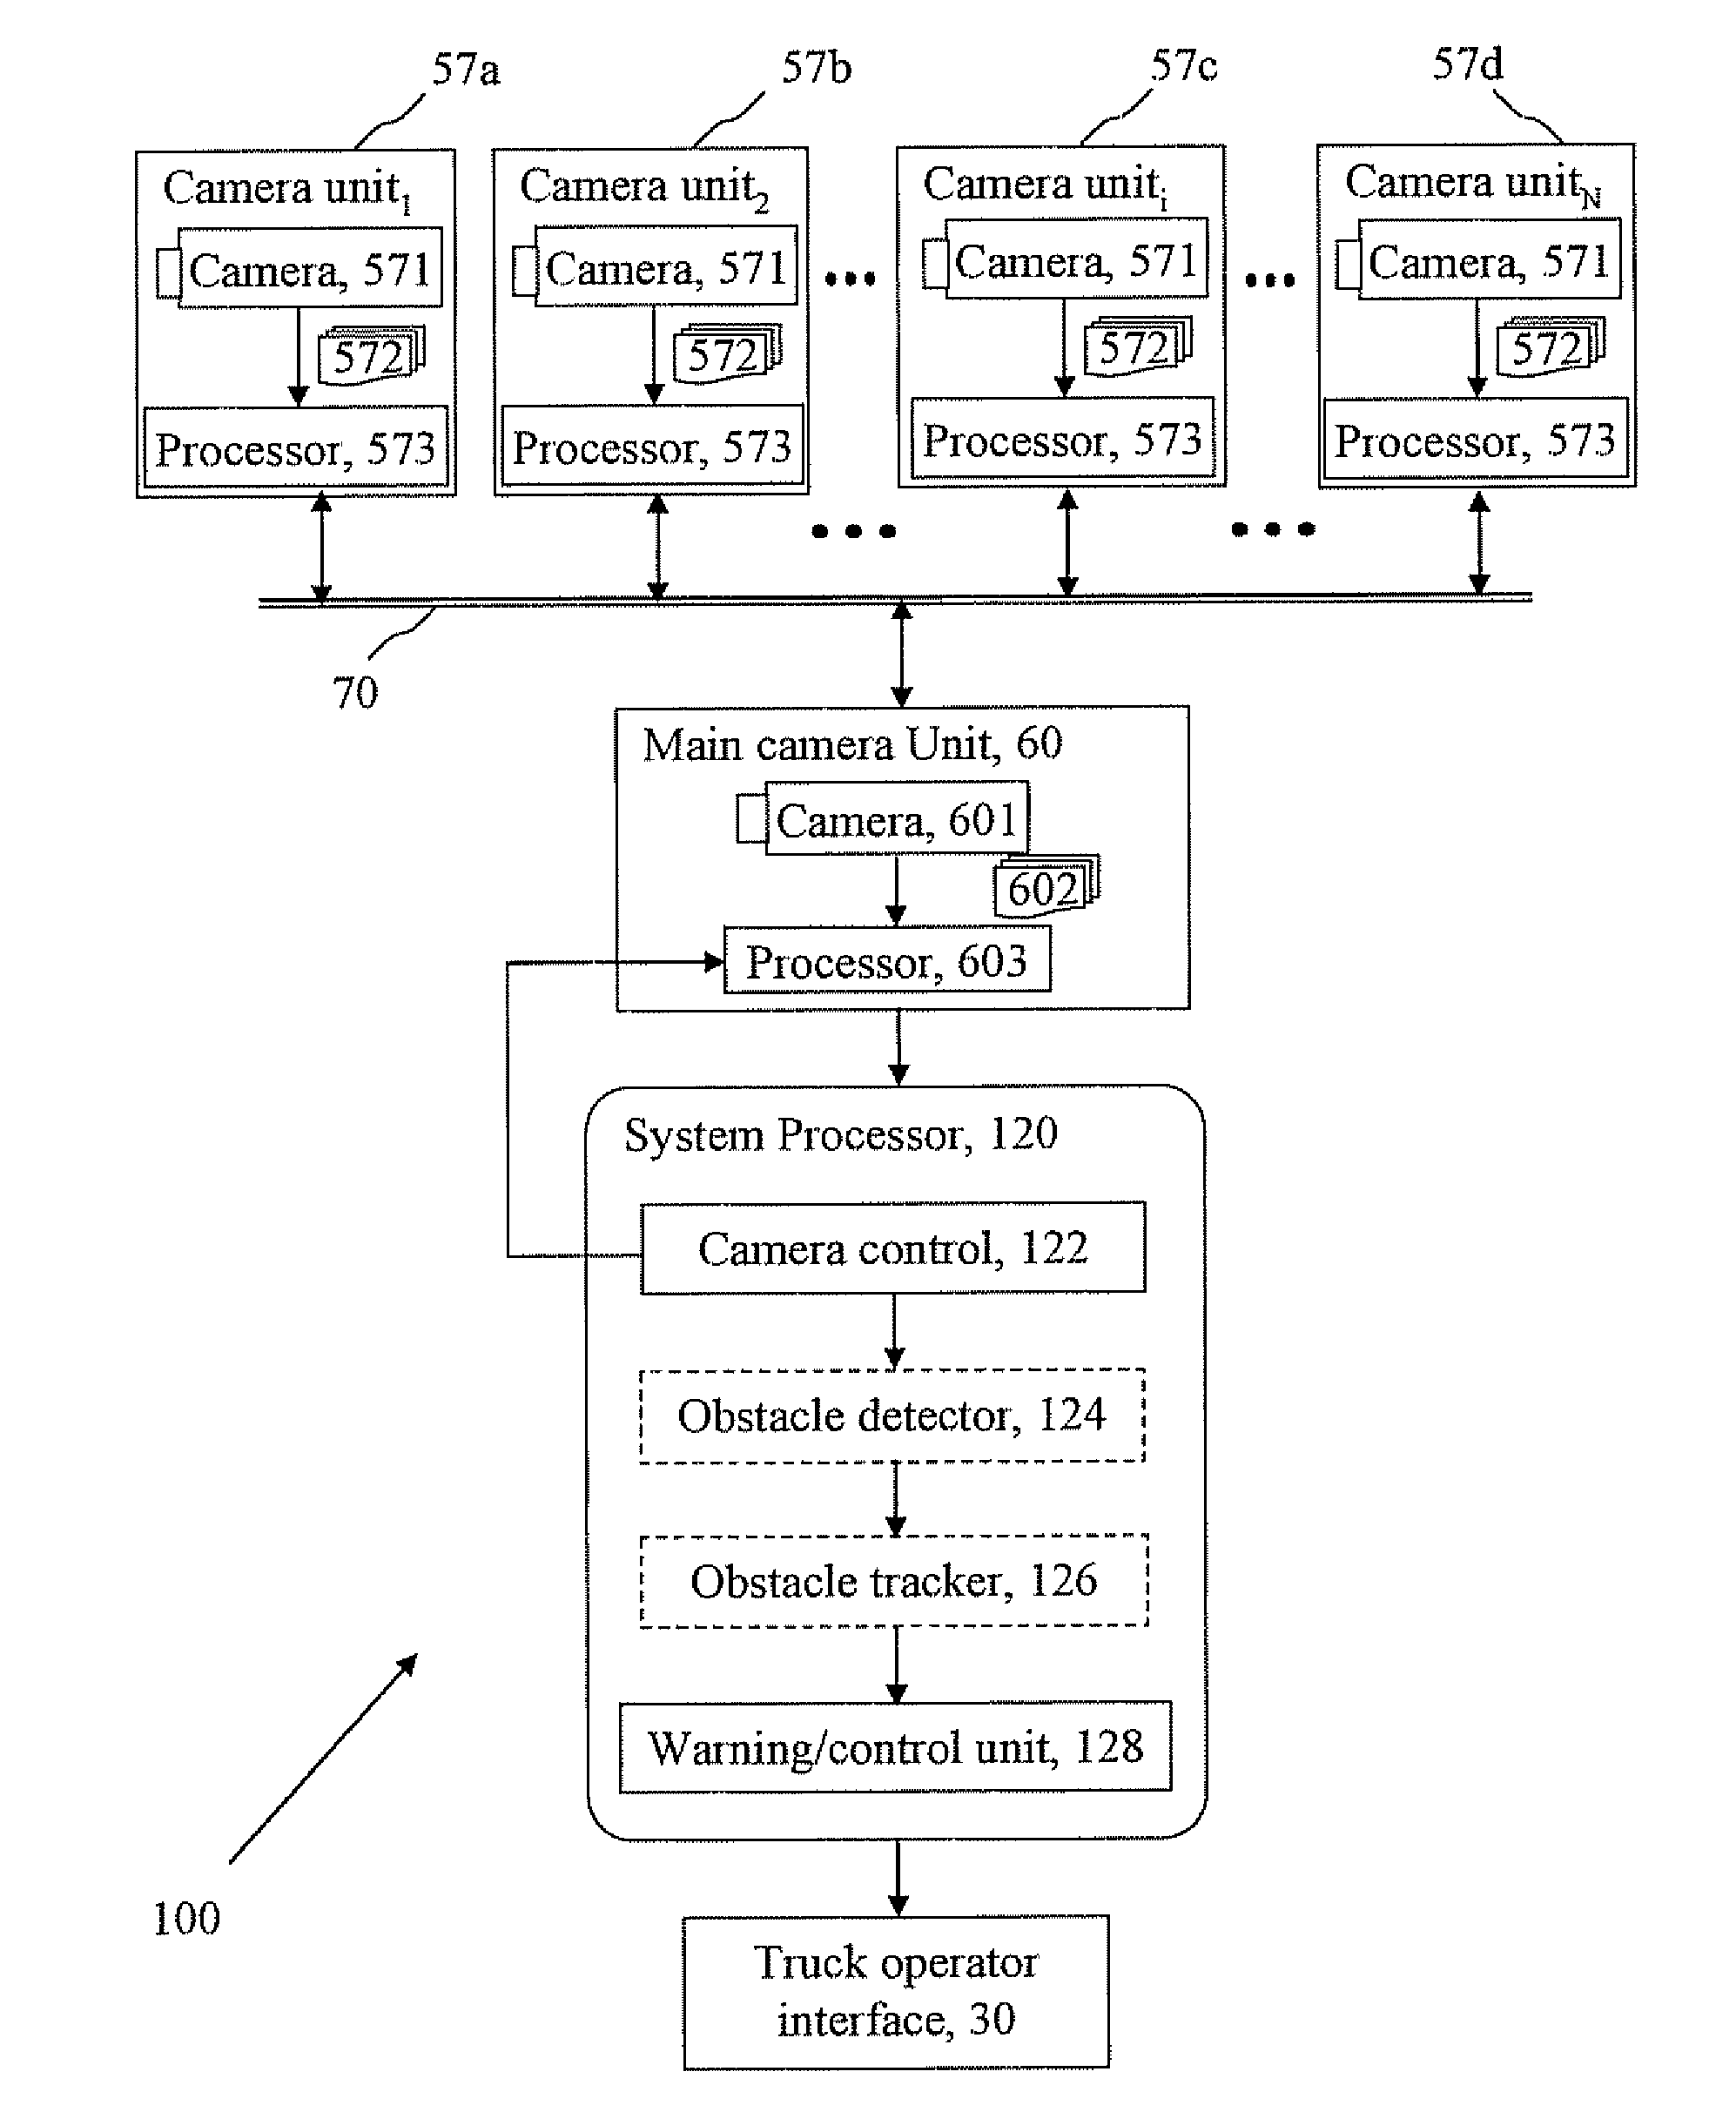 Systems And Methods For Detecting Pedestrians In The Vicinity Of A Powered Industrial Vehicle